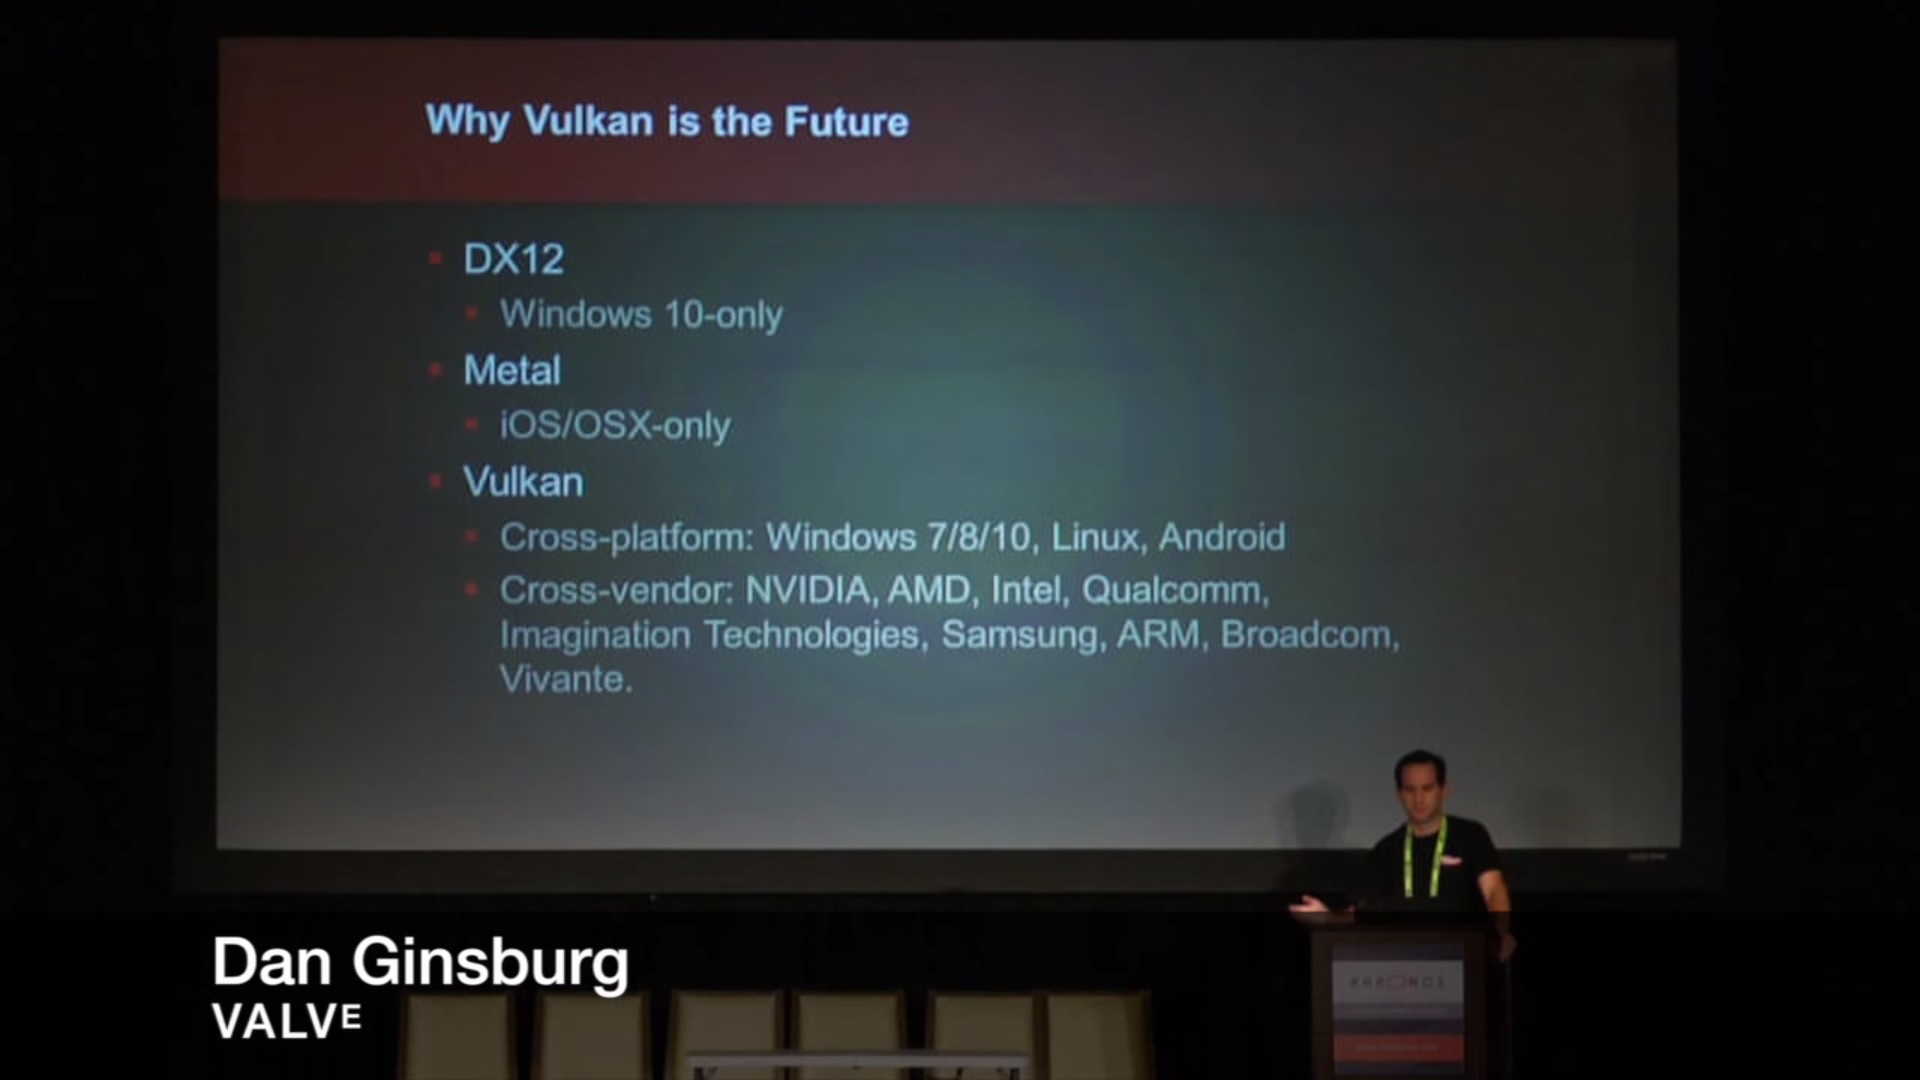 DirectX 12 will ship with Windows 10